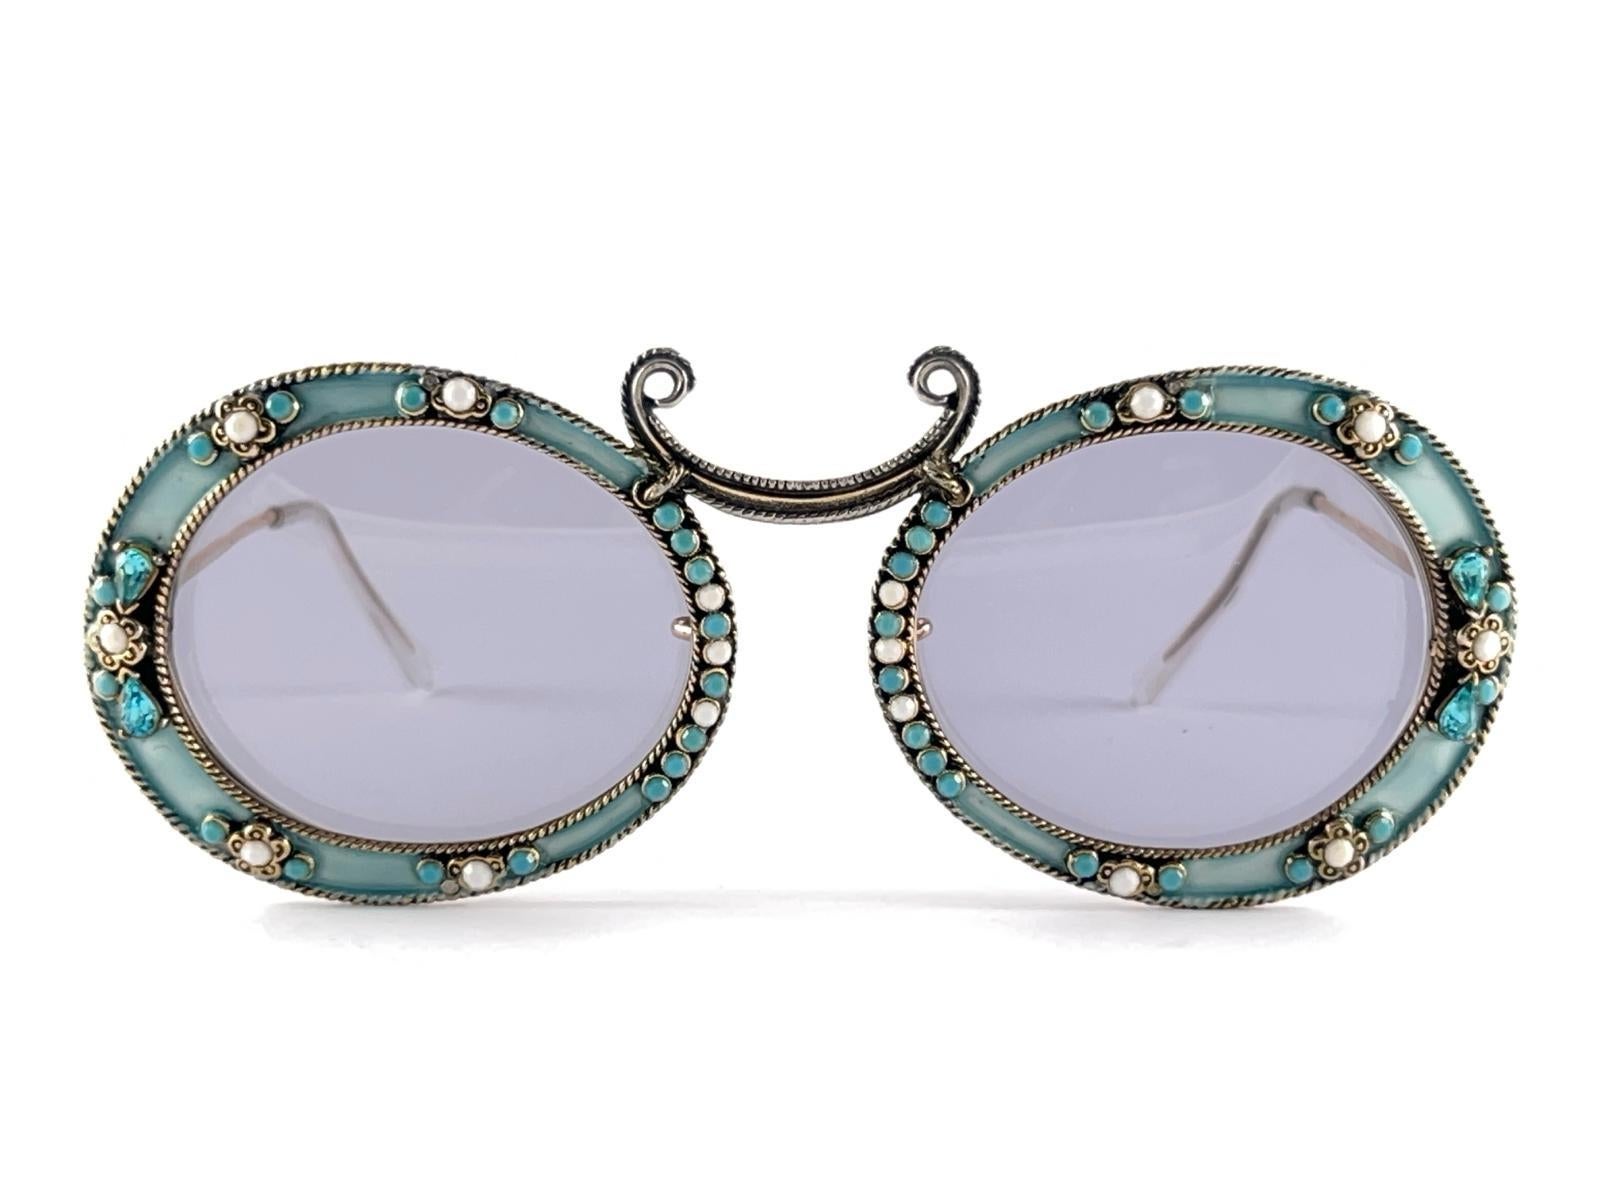 Ultra Rare 1960 Christian Dior Emaille Jewelled by Tura Collector Item Sonnenbrille im Angebot 3